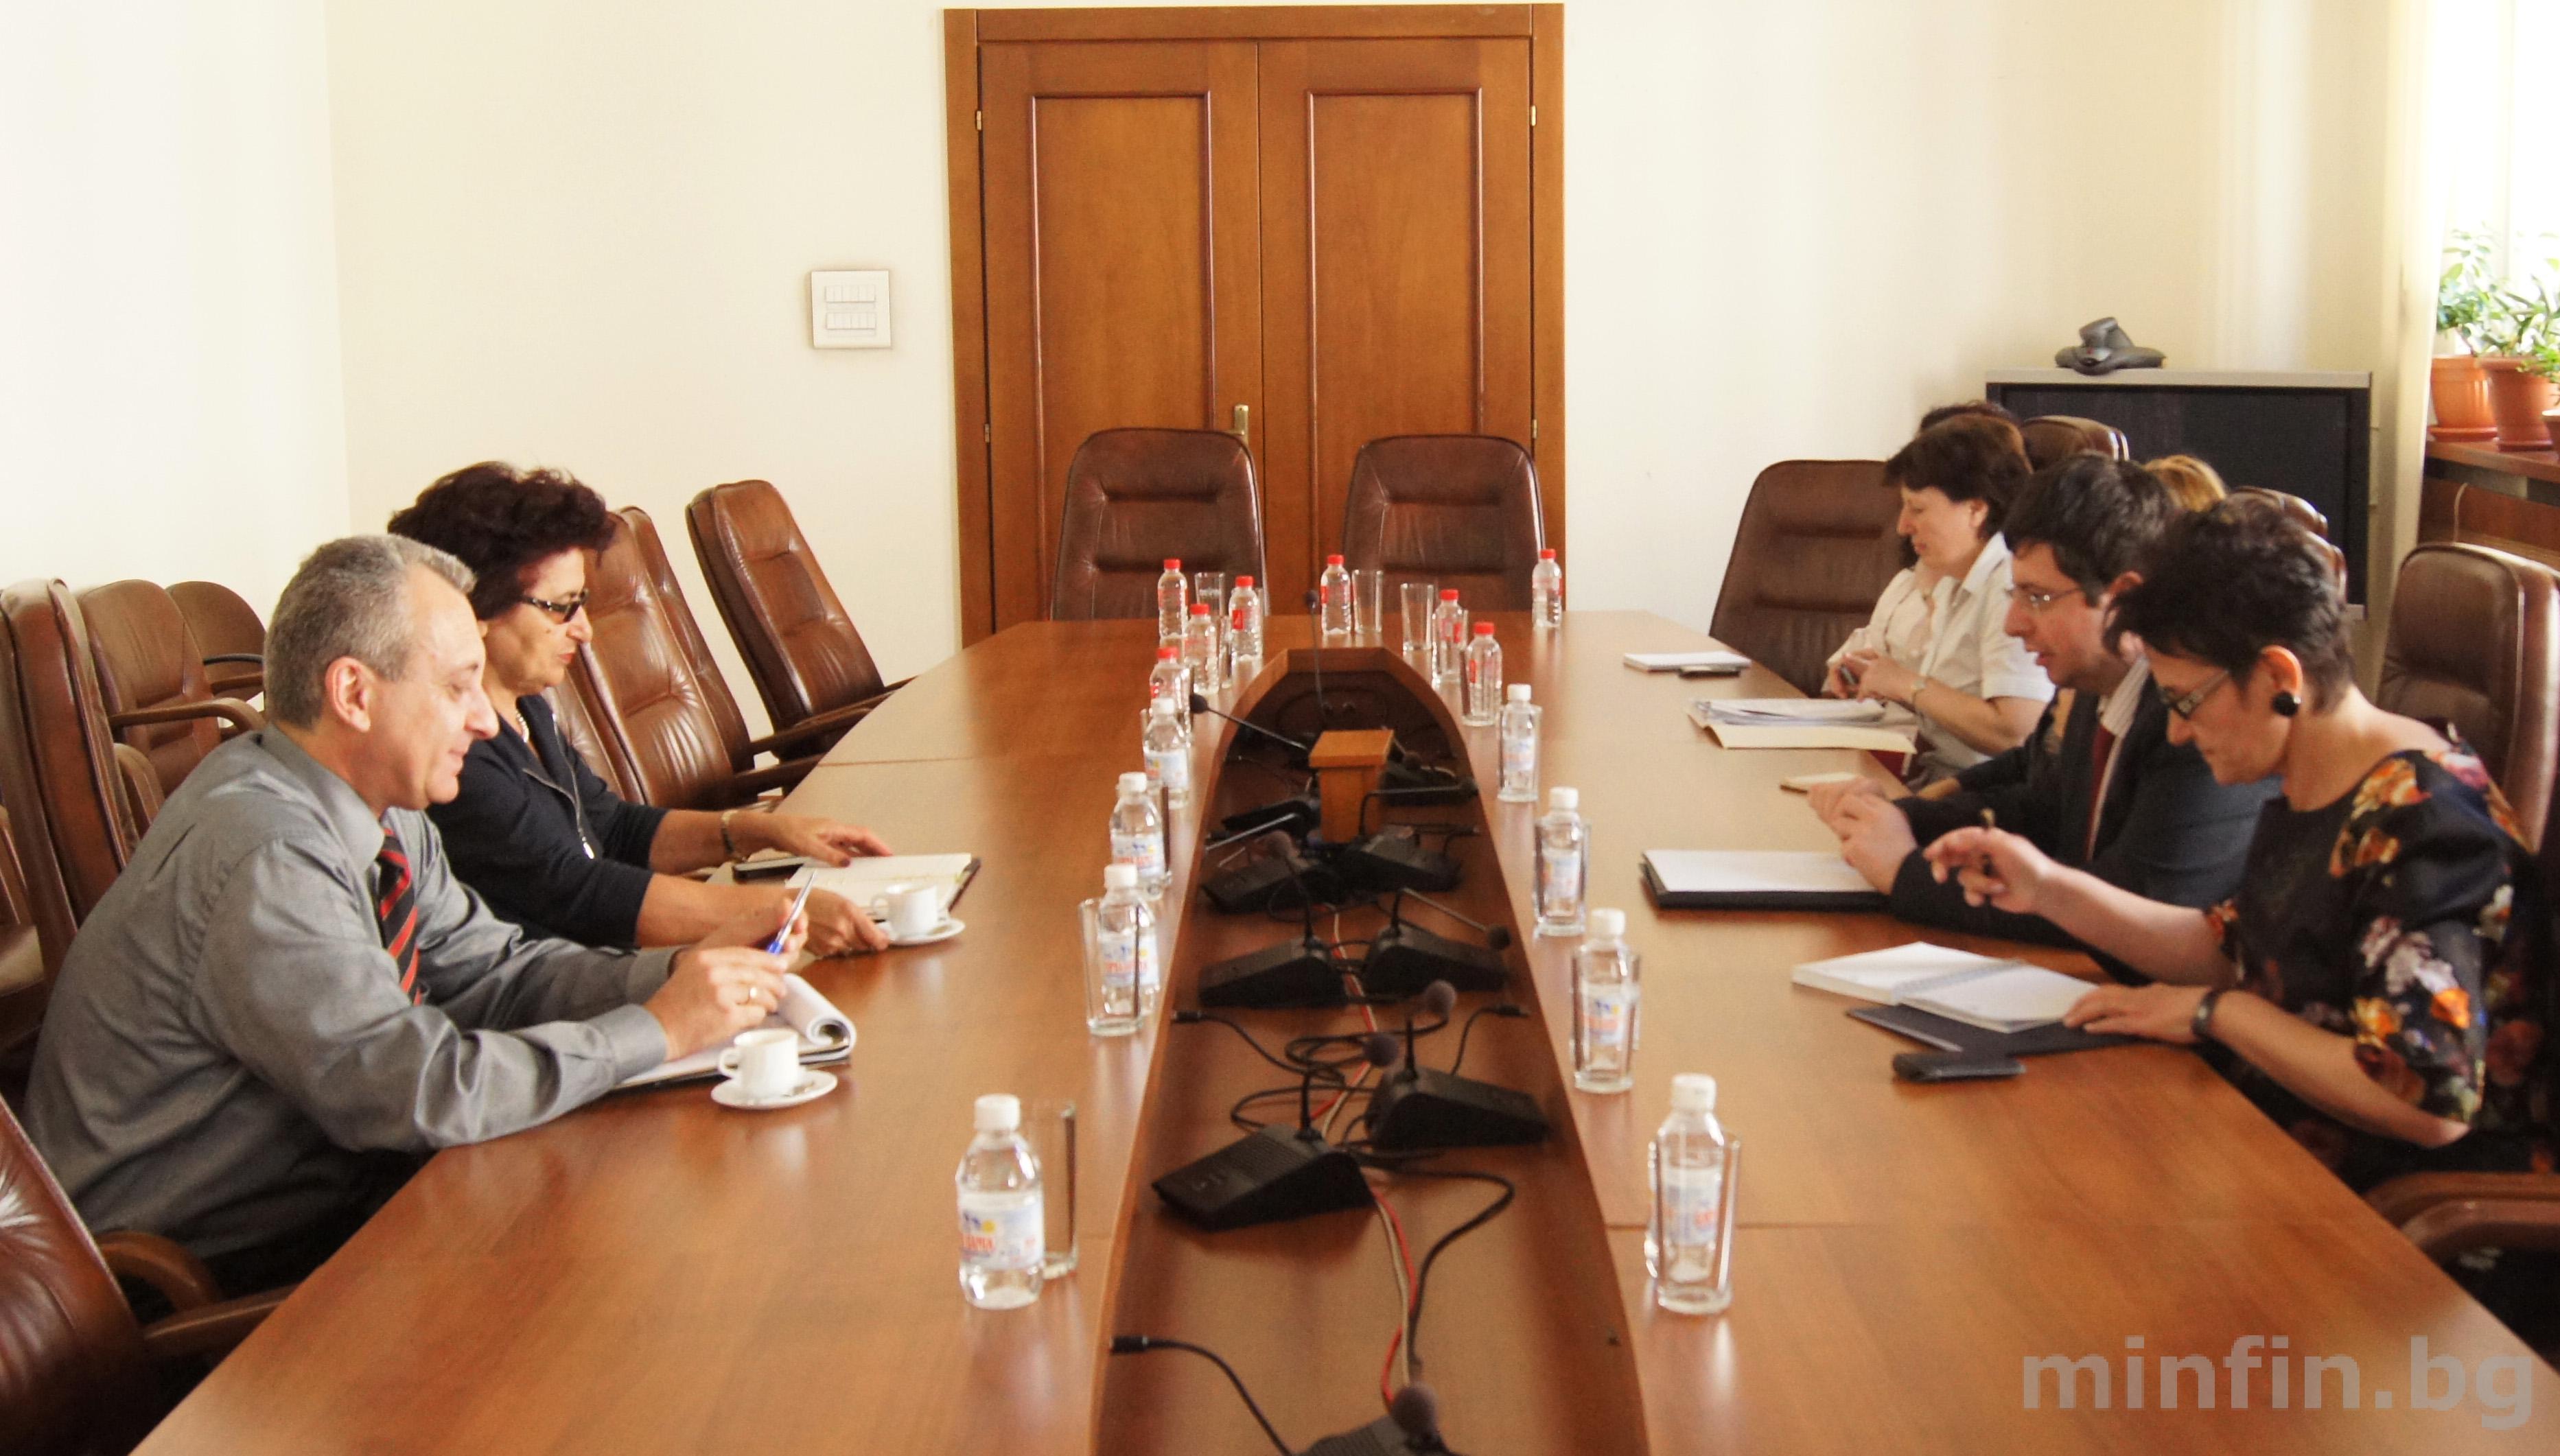 THE MINISTRY OF FINANCE DISCUSSES REVENUE COLLECTION MEASURES WITH THE NATIONAL ASSOCIATION OF MUNICIPALITIES IN BULGARIA